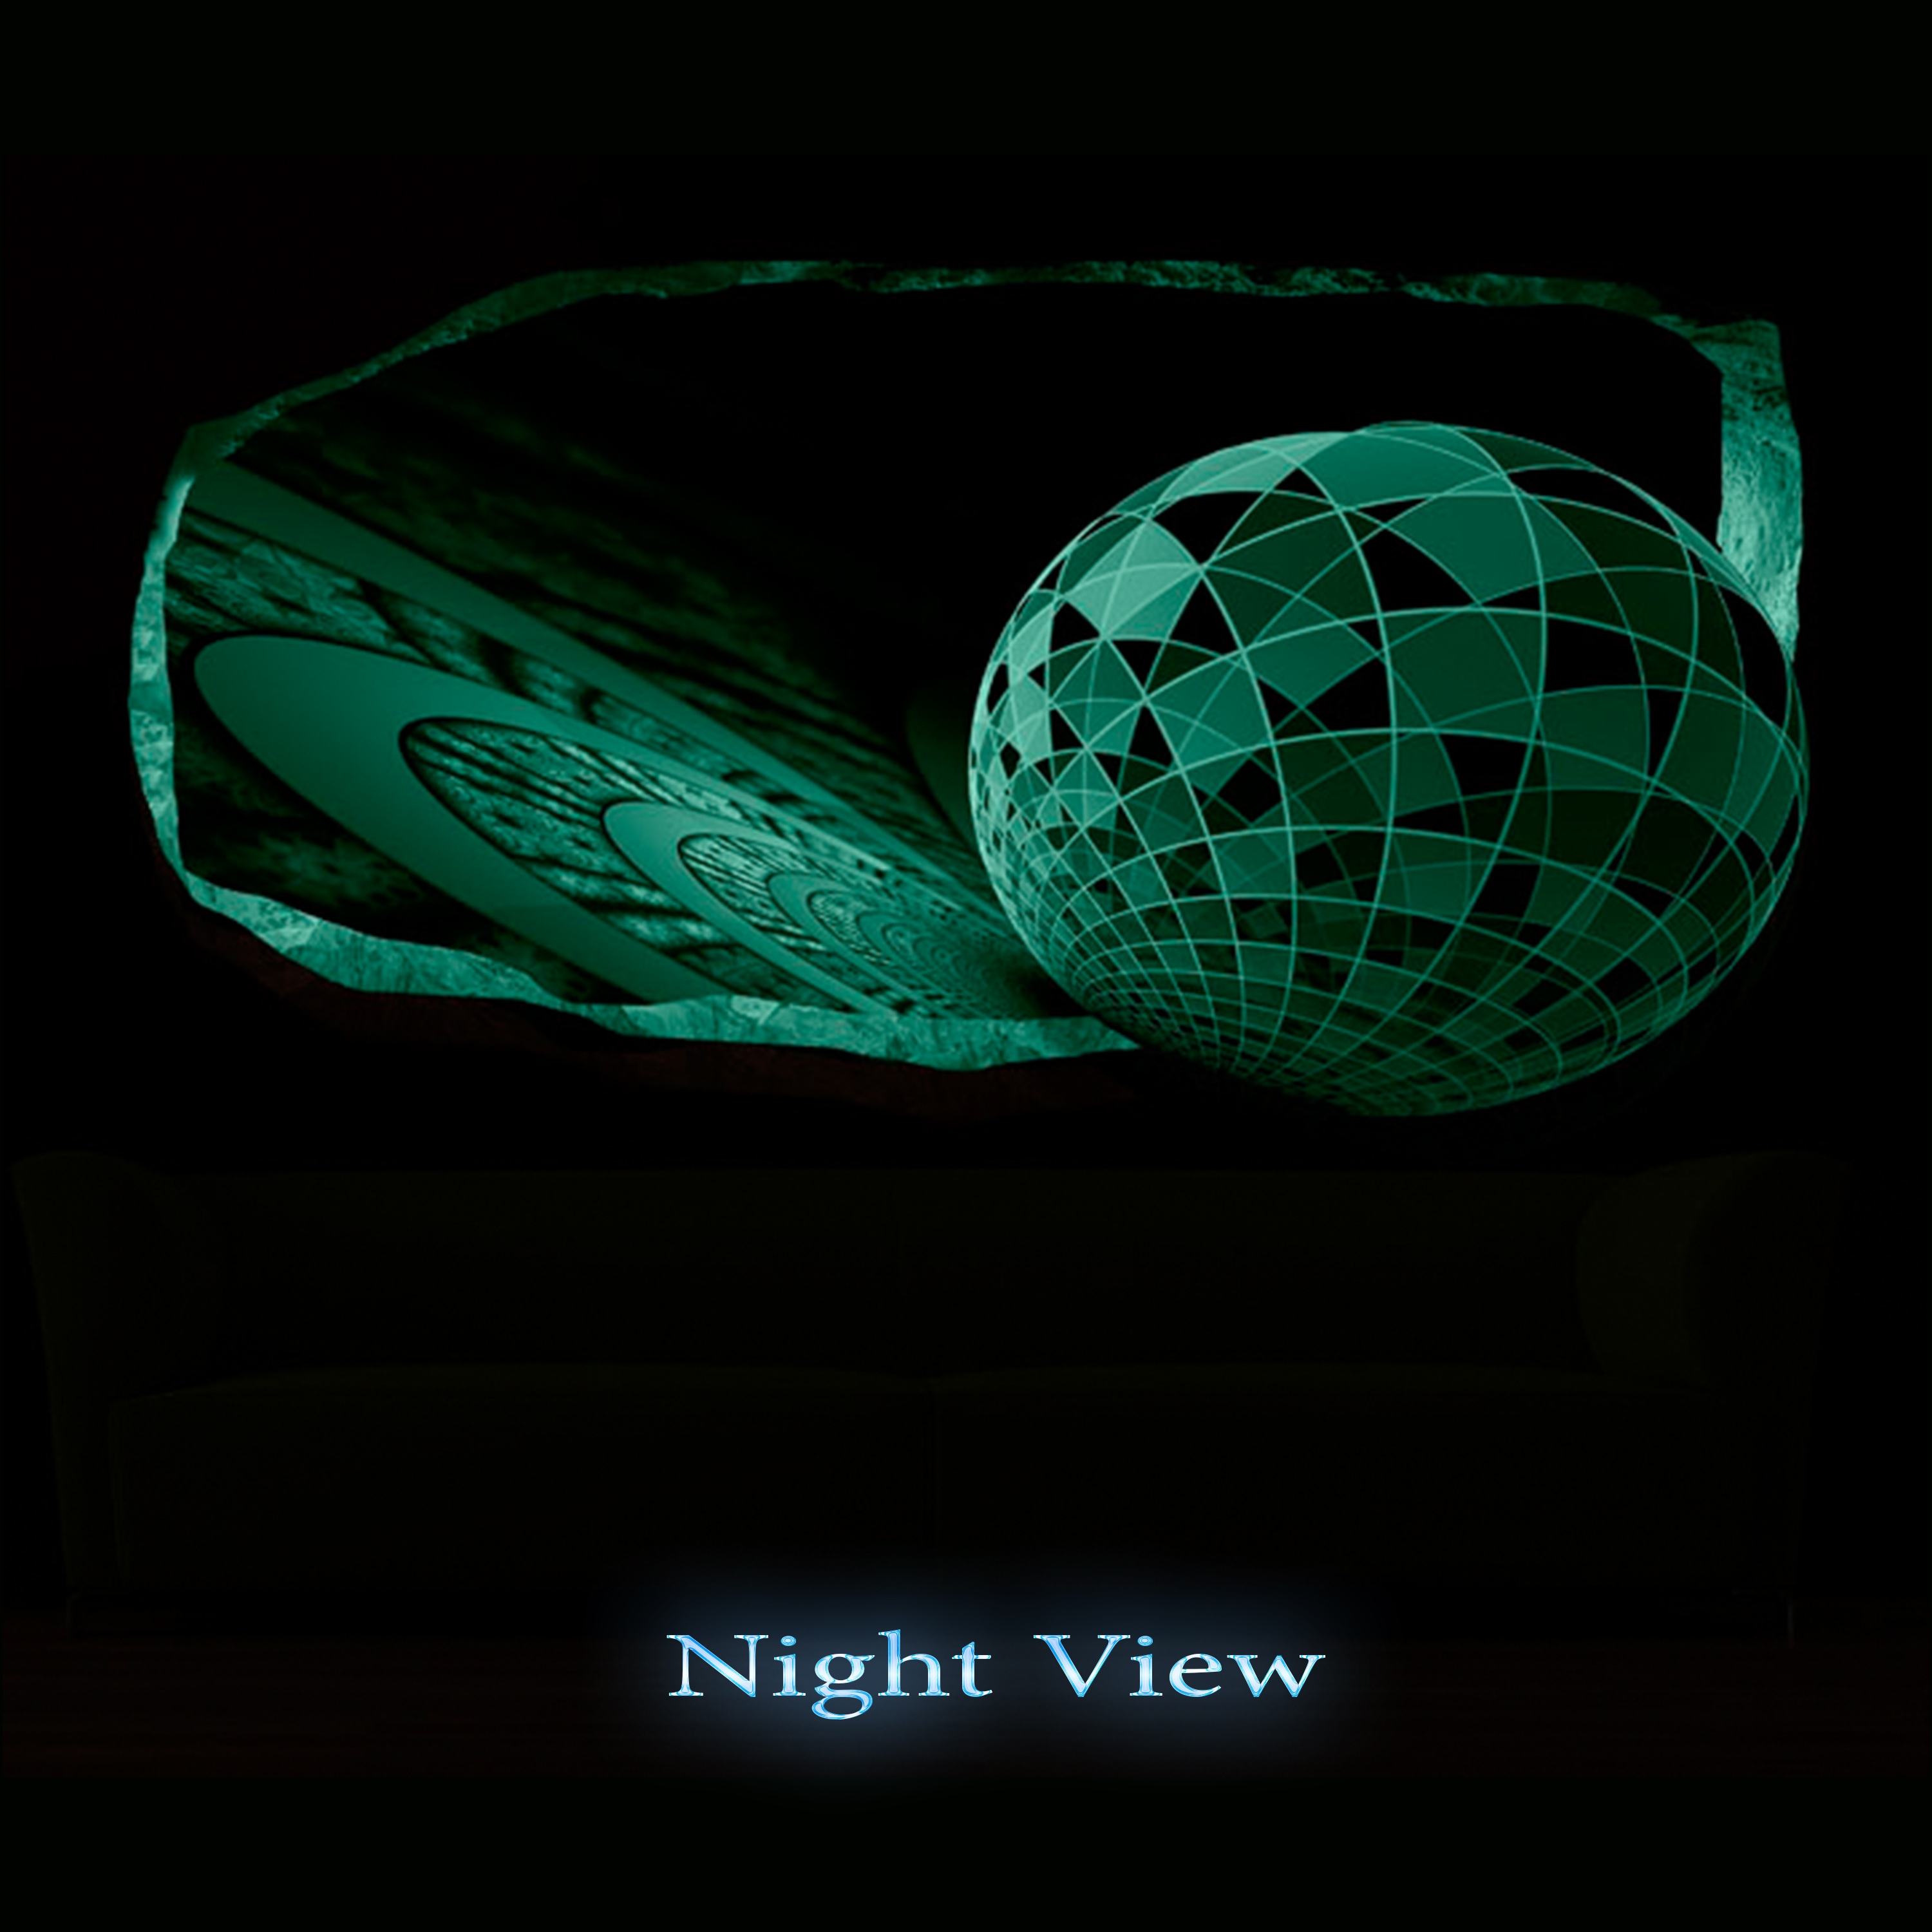 Startonight 3D Mural Wall Art Photo Decor Green Mosaic Amazing Dual View Surprise Wall Mural Wallpaper for Bedroom Abstract Wall Art Gift Large 47.24 ?? By 86.61 ?? - image 2 of 4